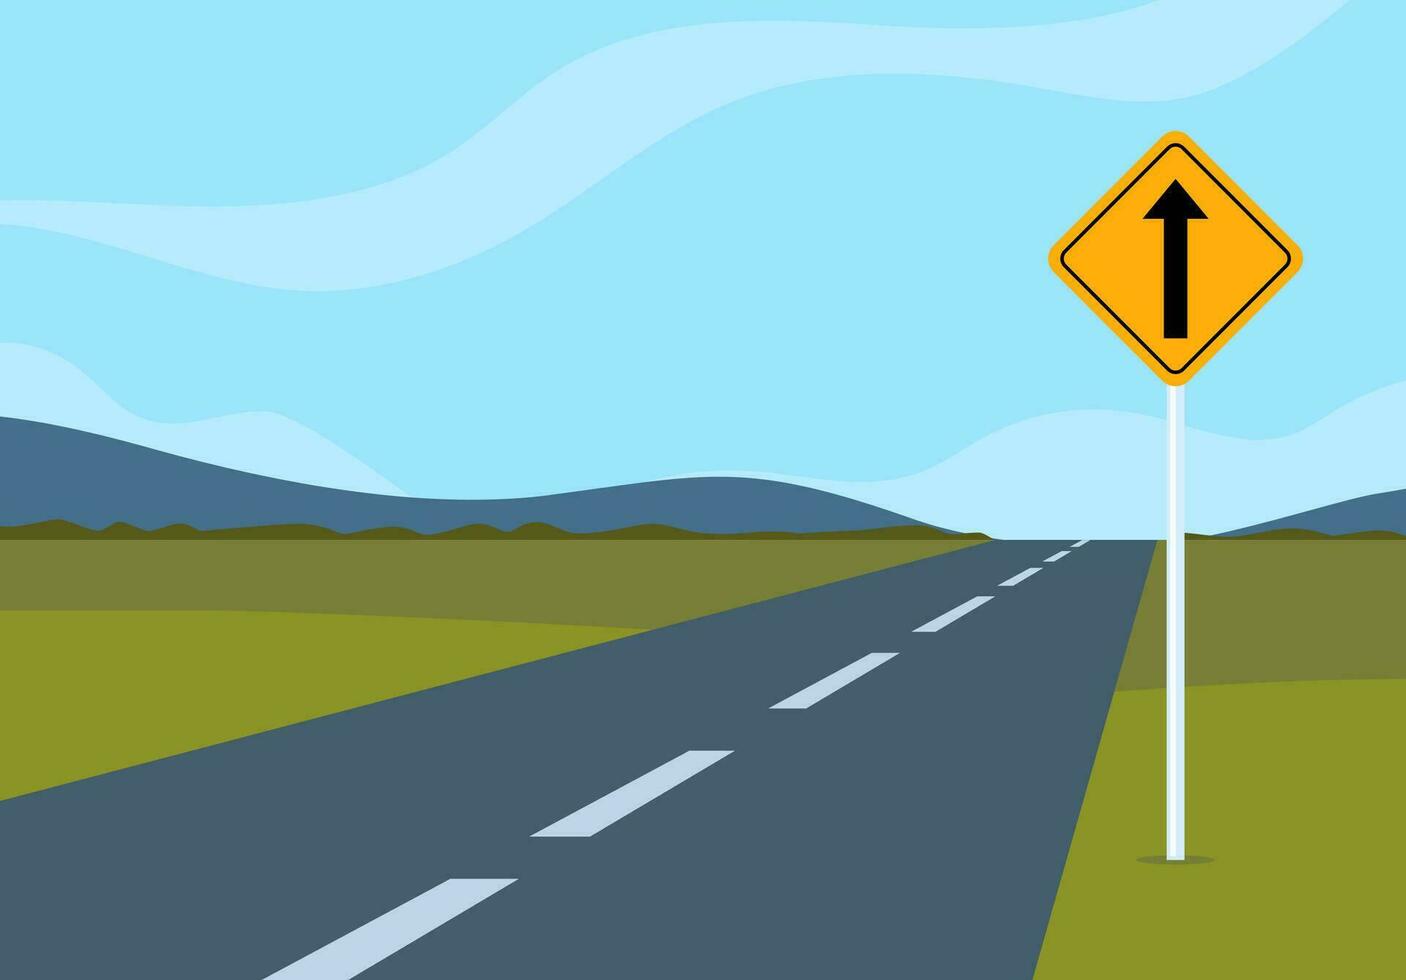 Road sign at side of the empty road. Traffic sign. Road traffic safety. Vector illustration.